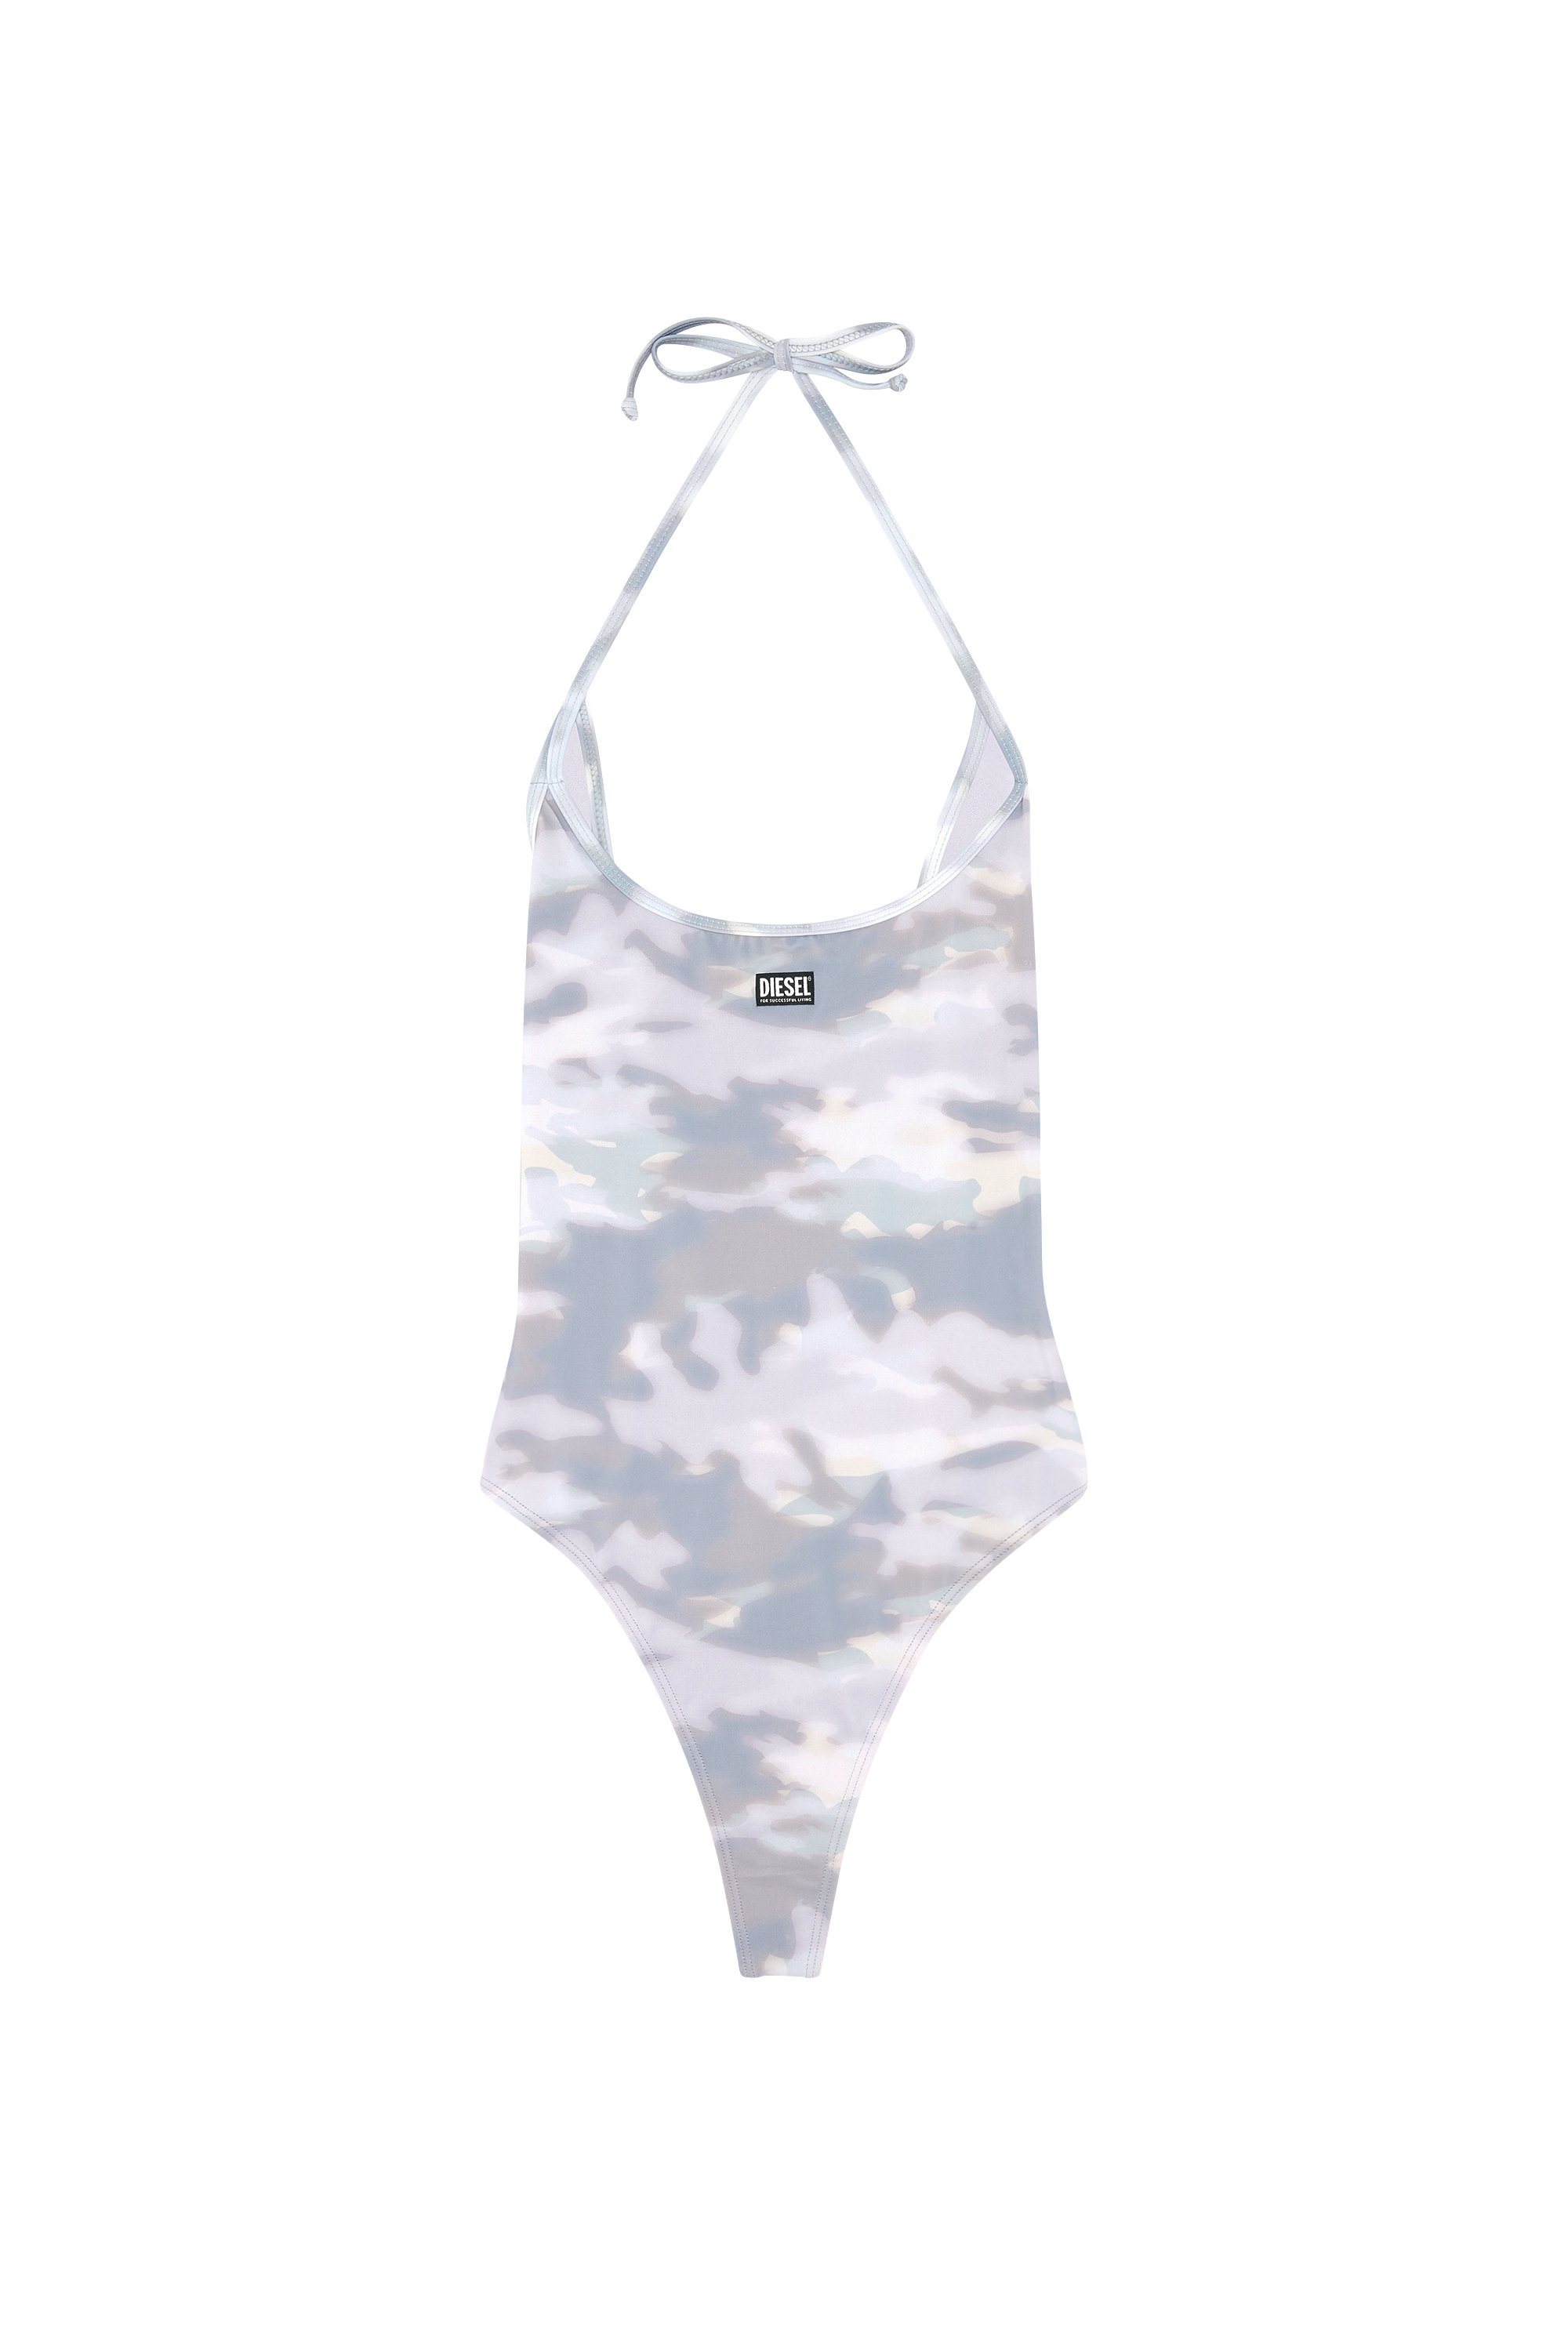 Diesel - BFSW-MINDY, Woman Swimsuit in recycled stretch fabric in Grey - Image 4